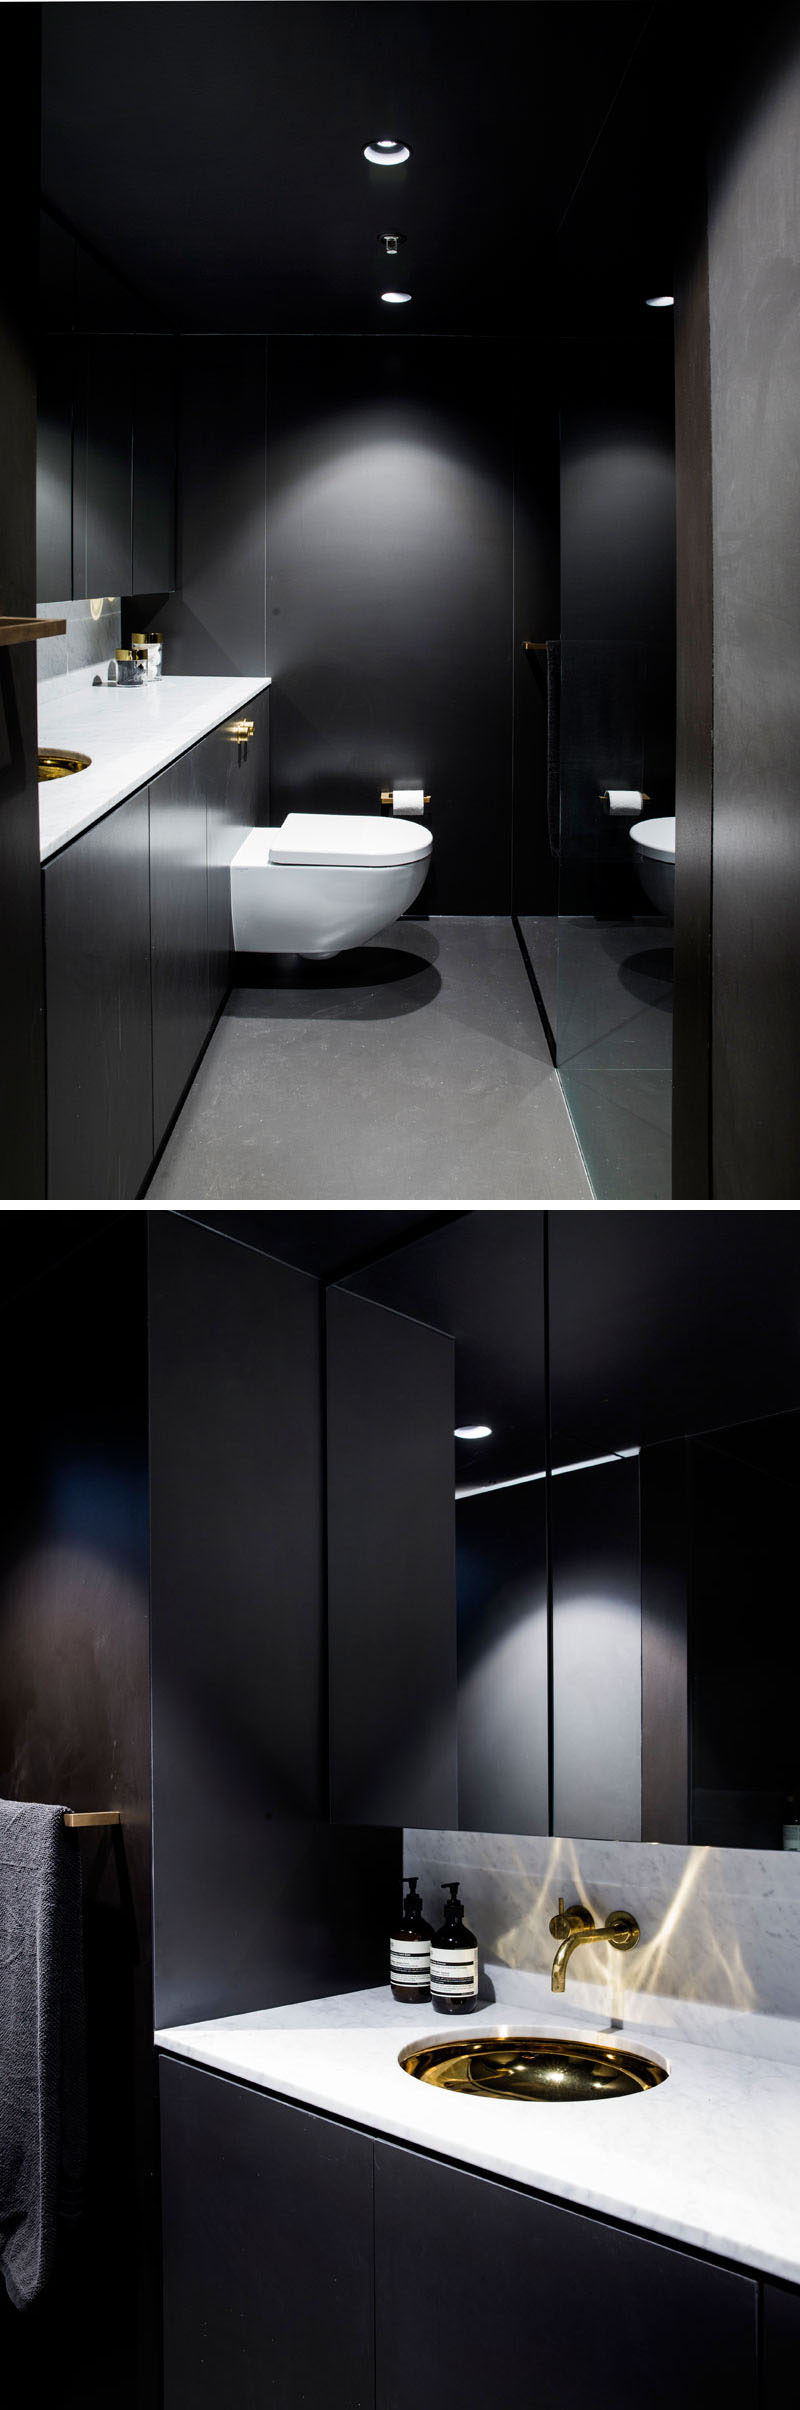 This dramatic black bathroom features a floor-to-ceiling mirror, grey flooring, a white countertop and gold accents.